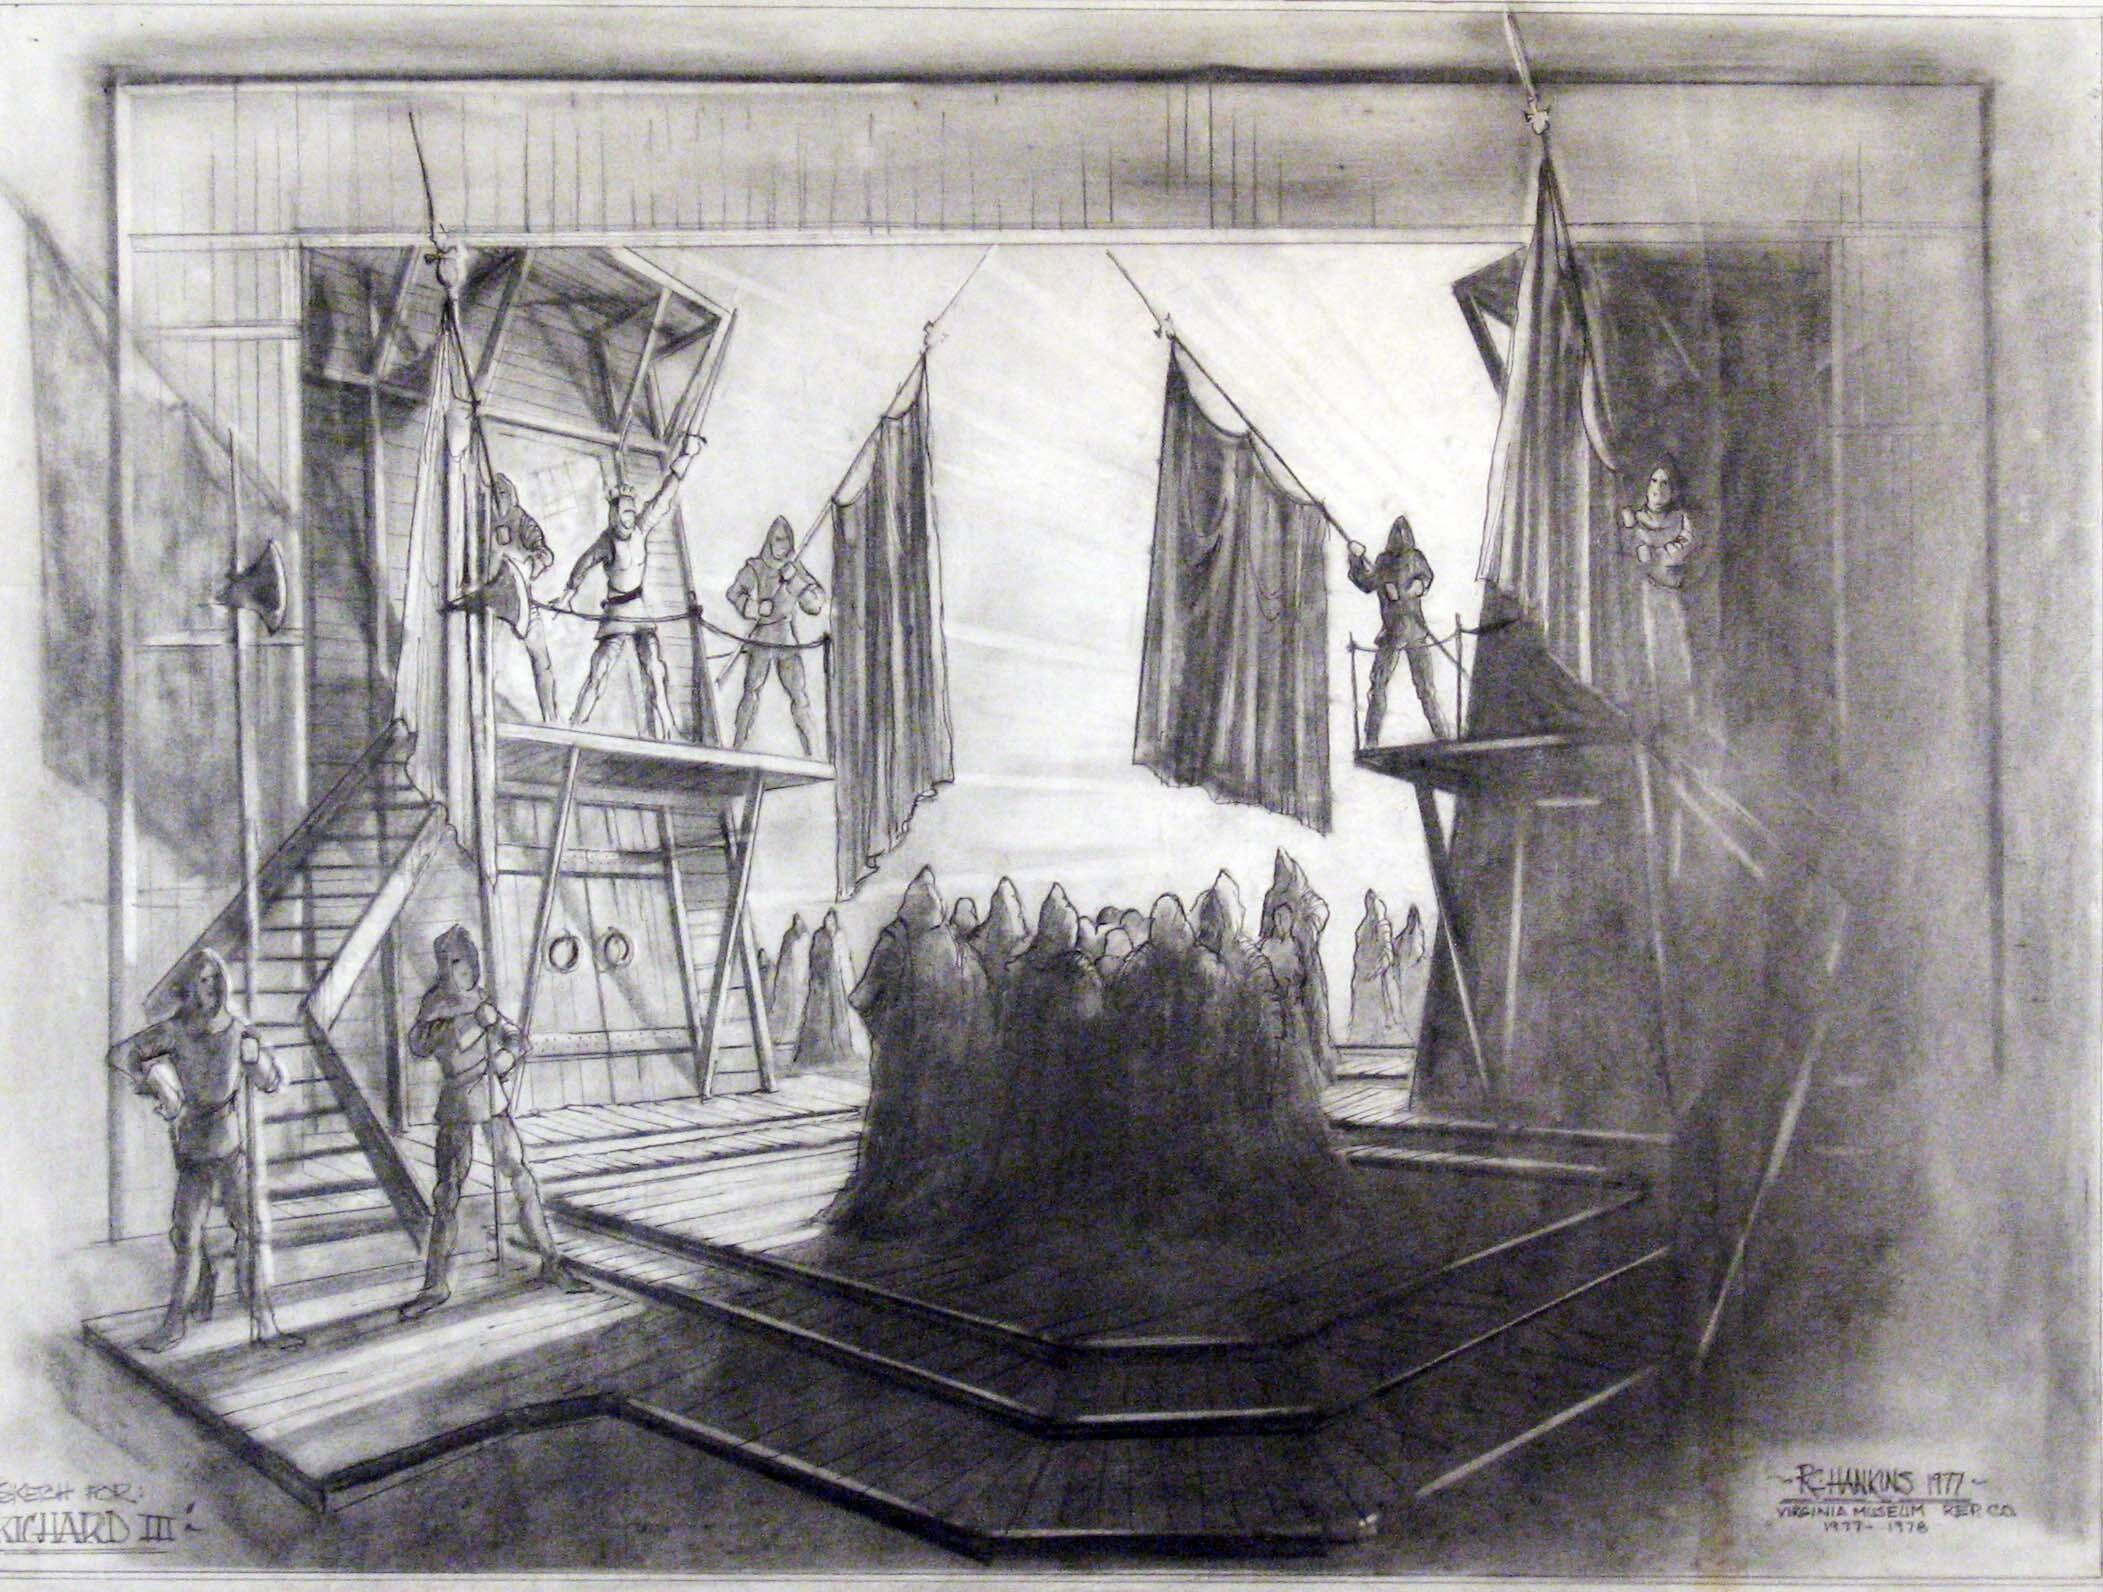 An illustration of a stage with actors standing on it in costumes. 